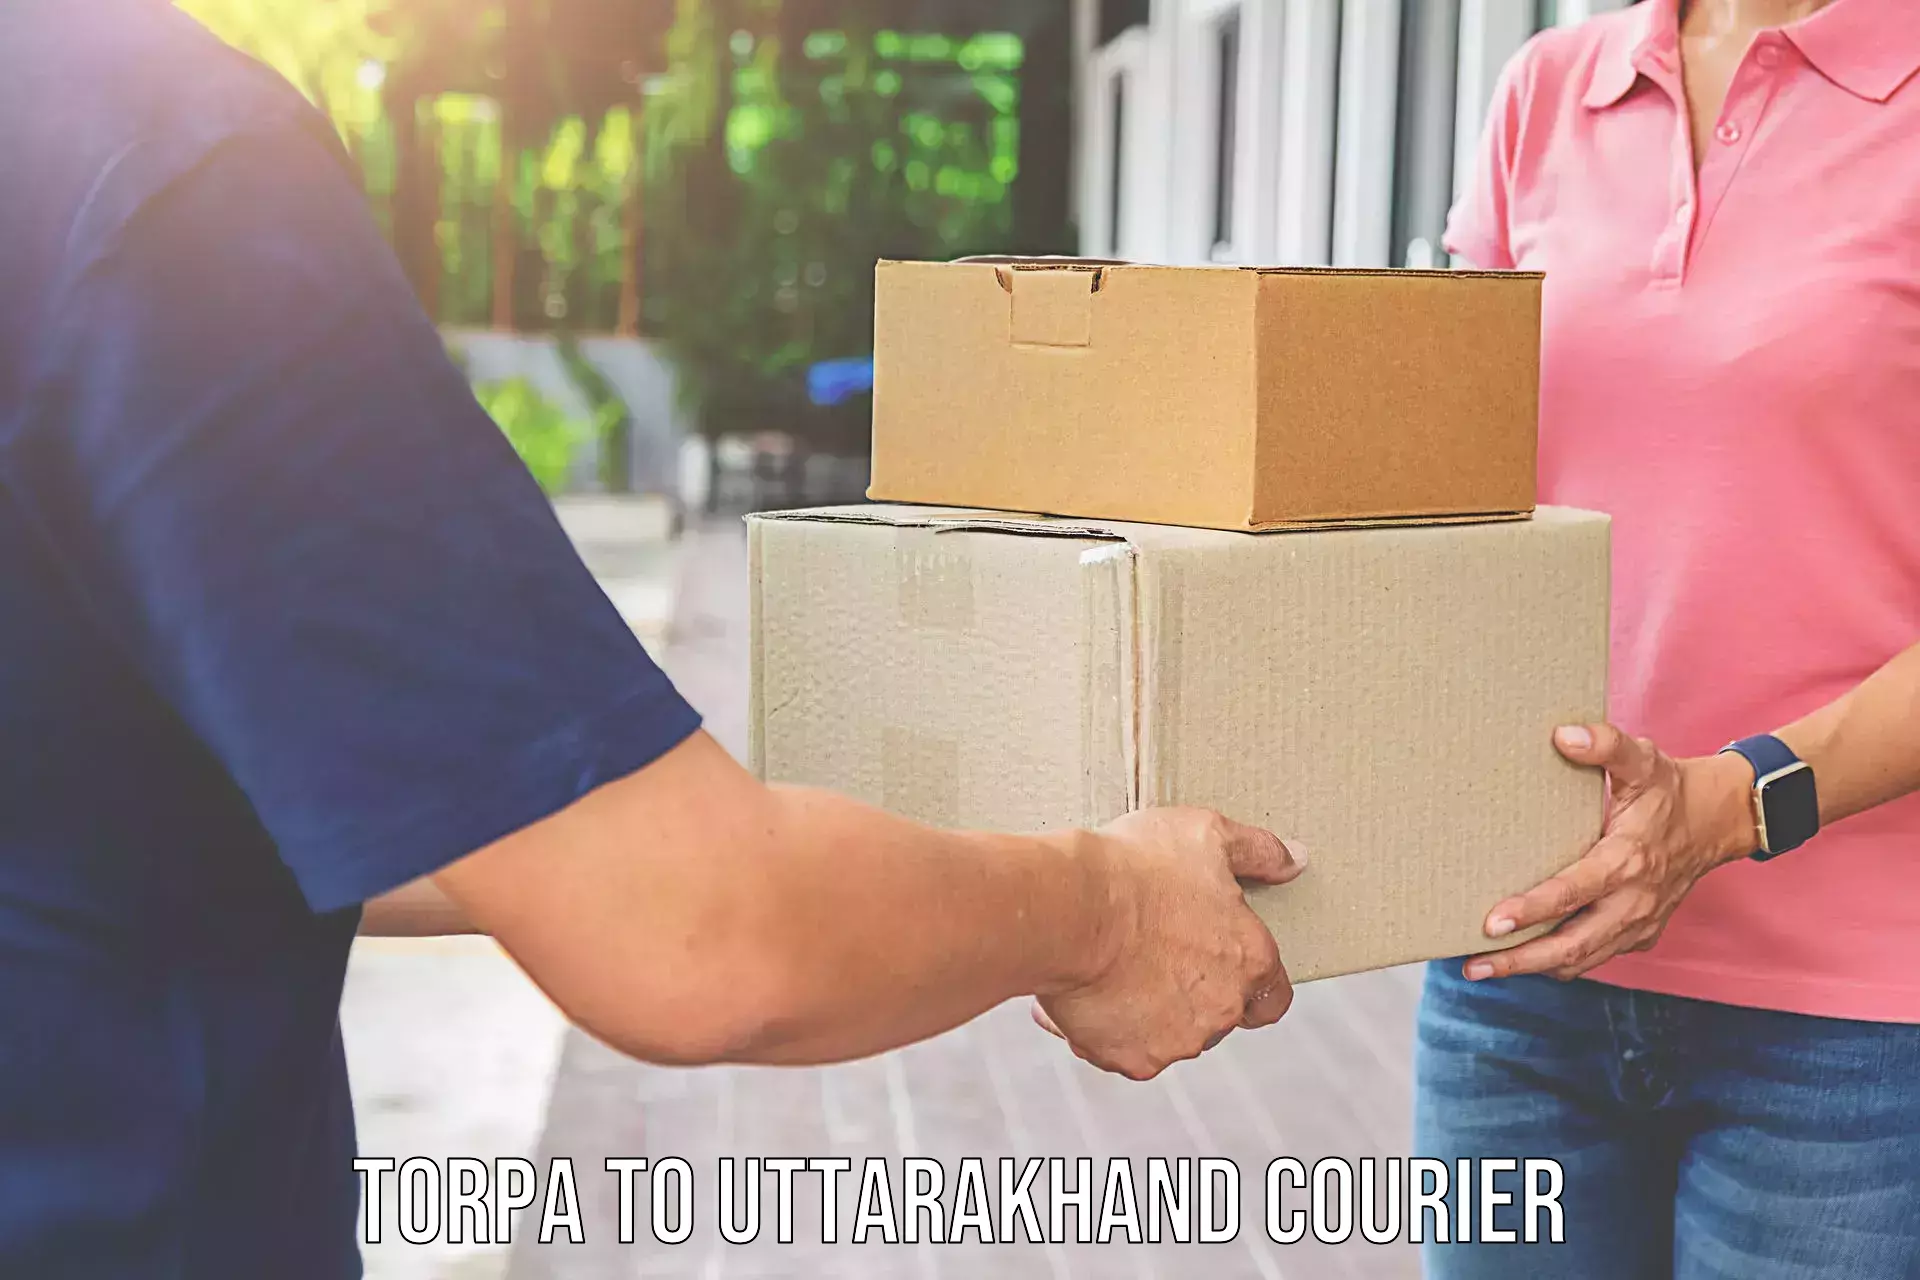 Furniture moving services in Torpa to Uttarkashi